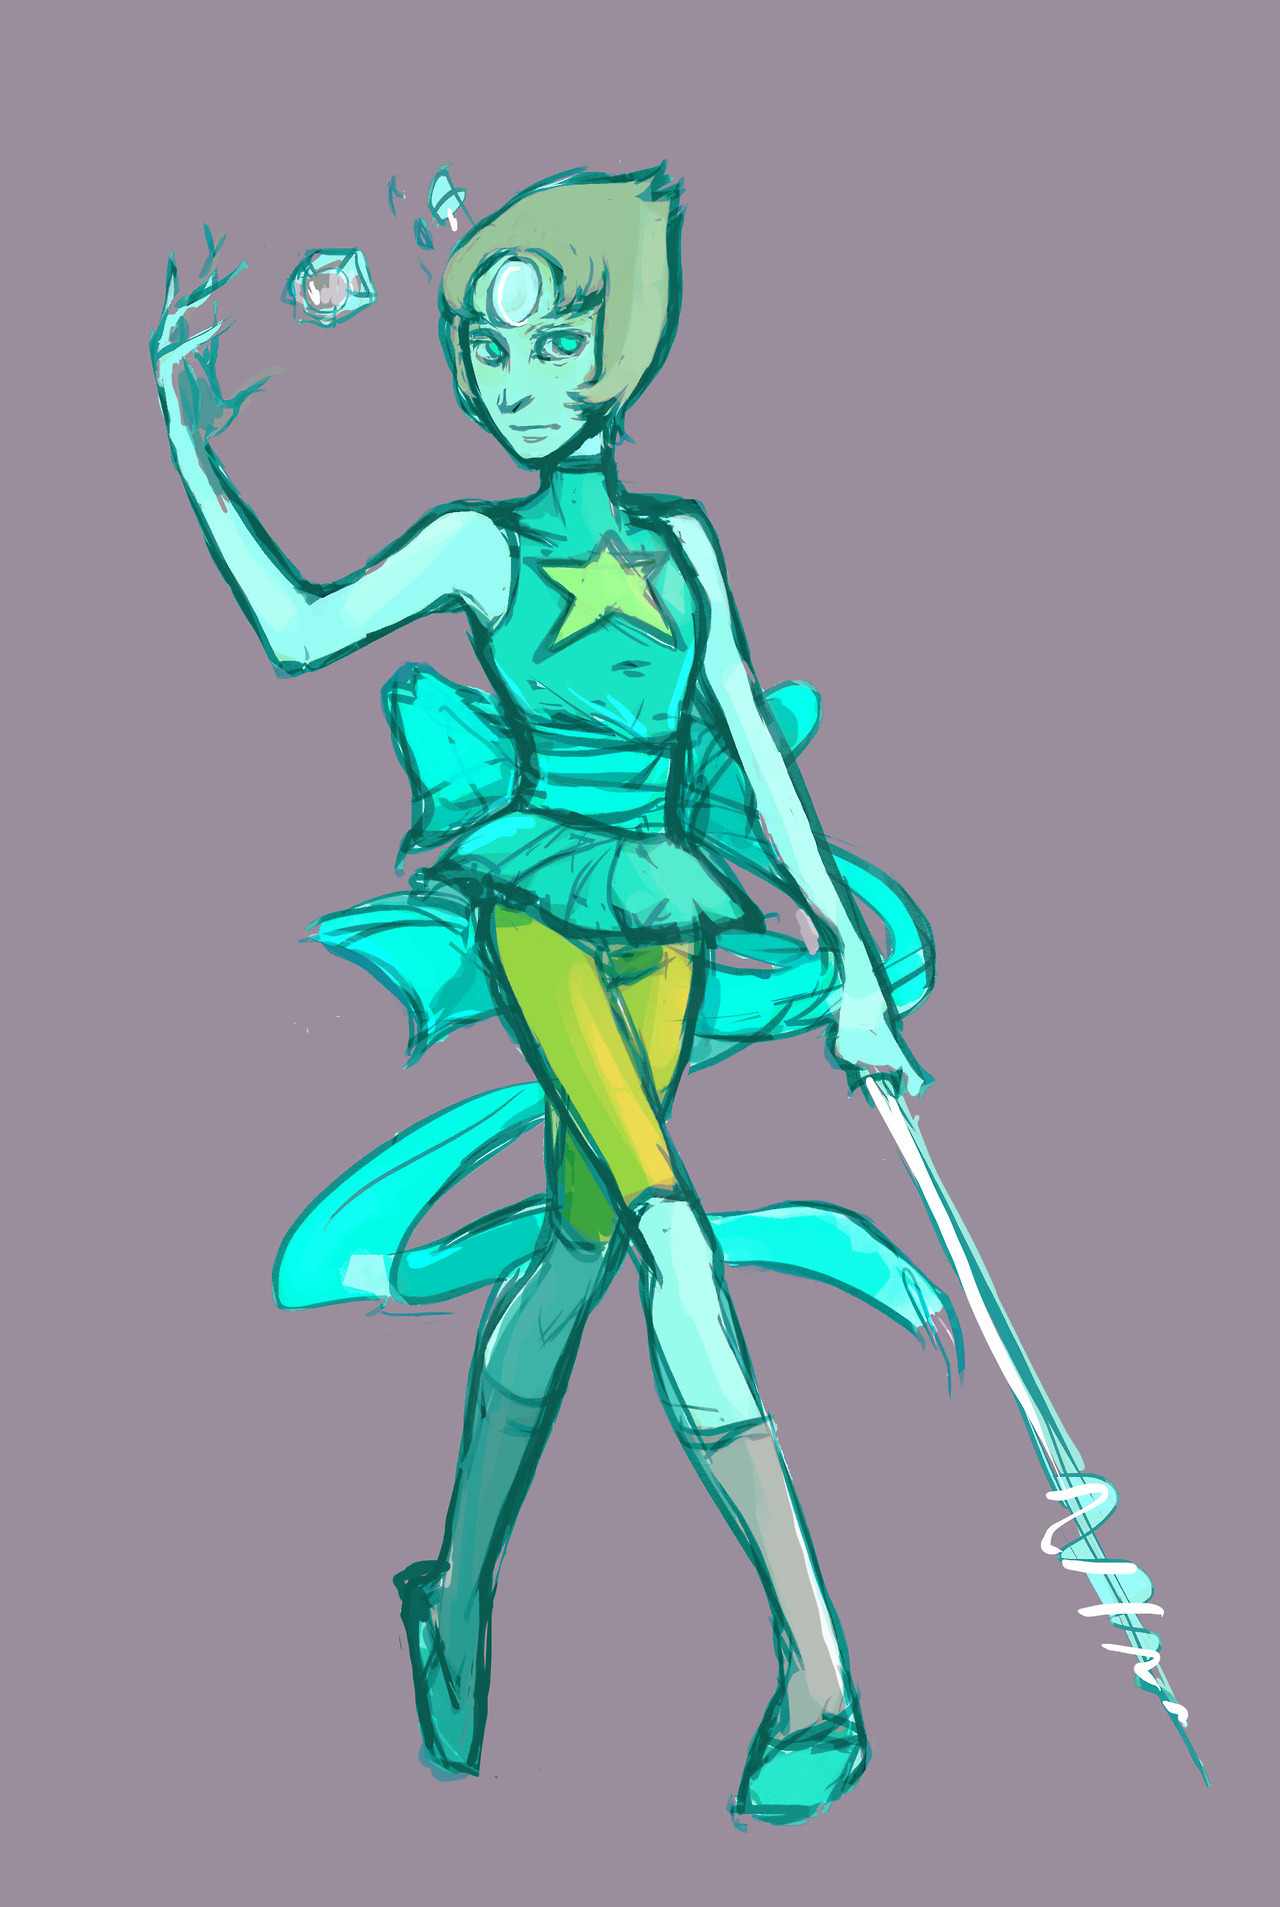 since I accidentally flattened my file, I cant finish it, so here you go ;-; pearl from steven universe (one of my favorite characters)